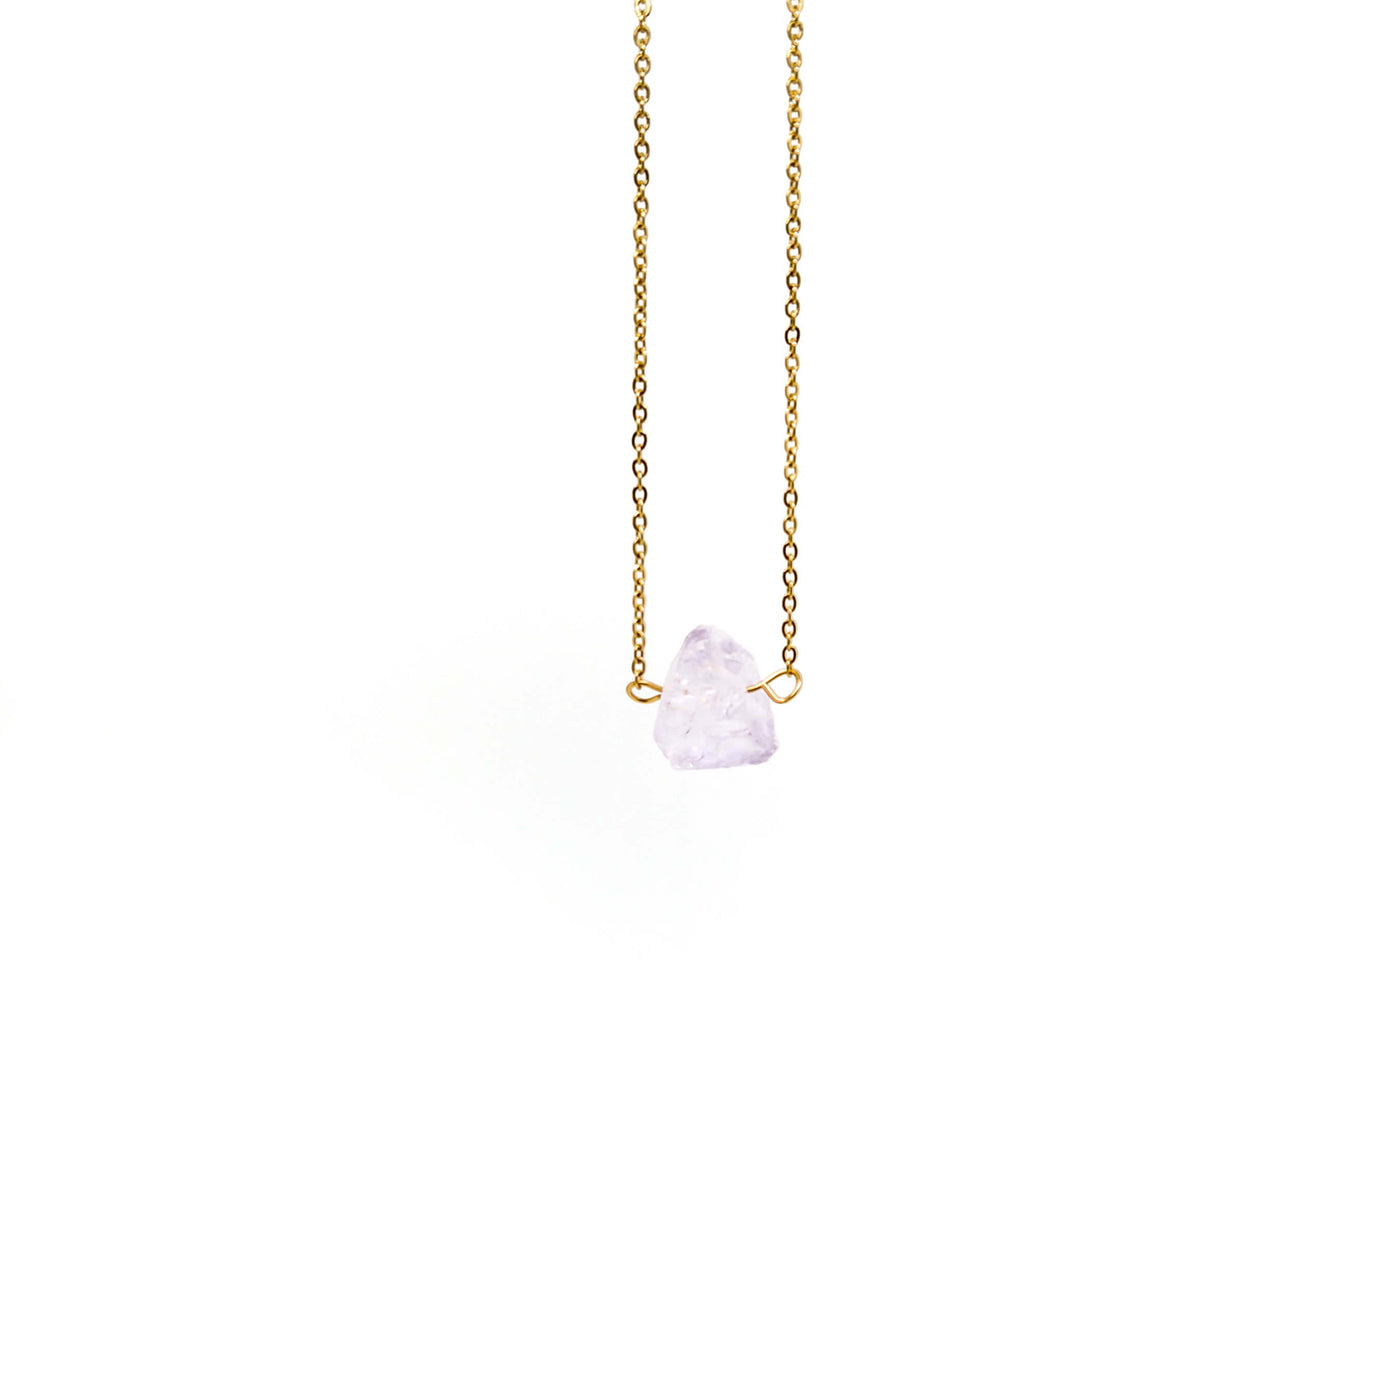 The Natural Light Amethyst Necklace